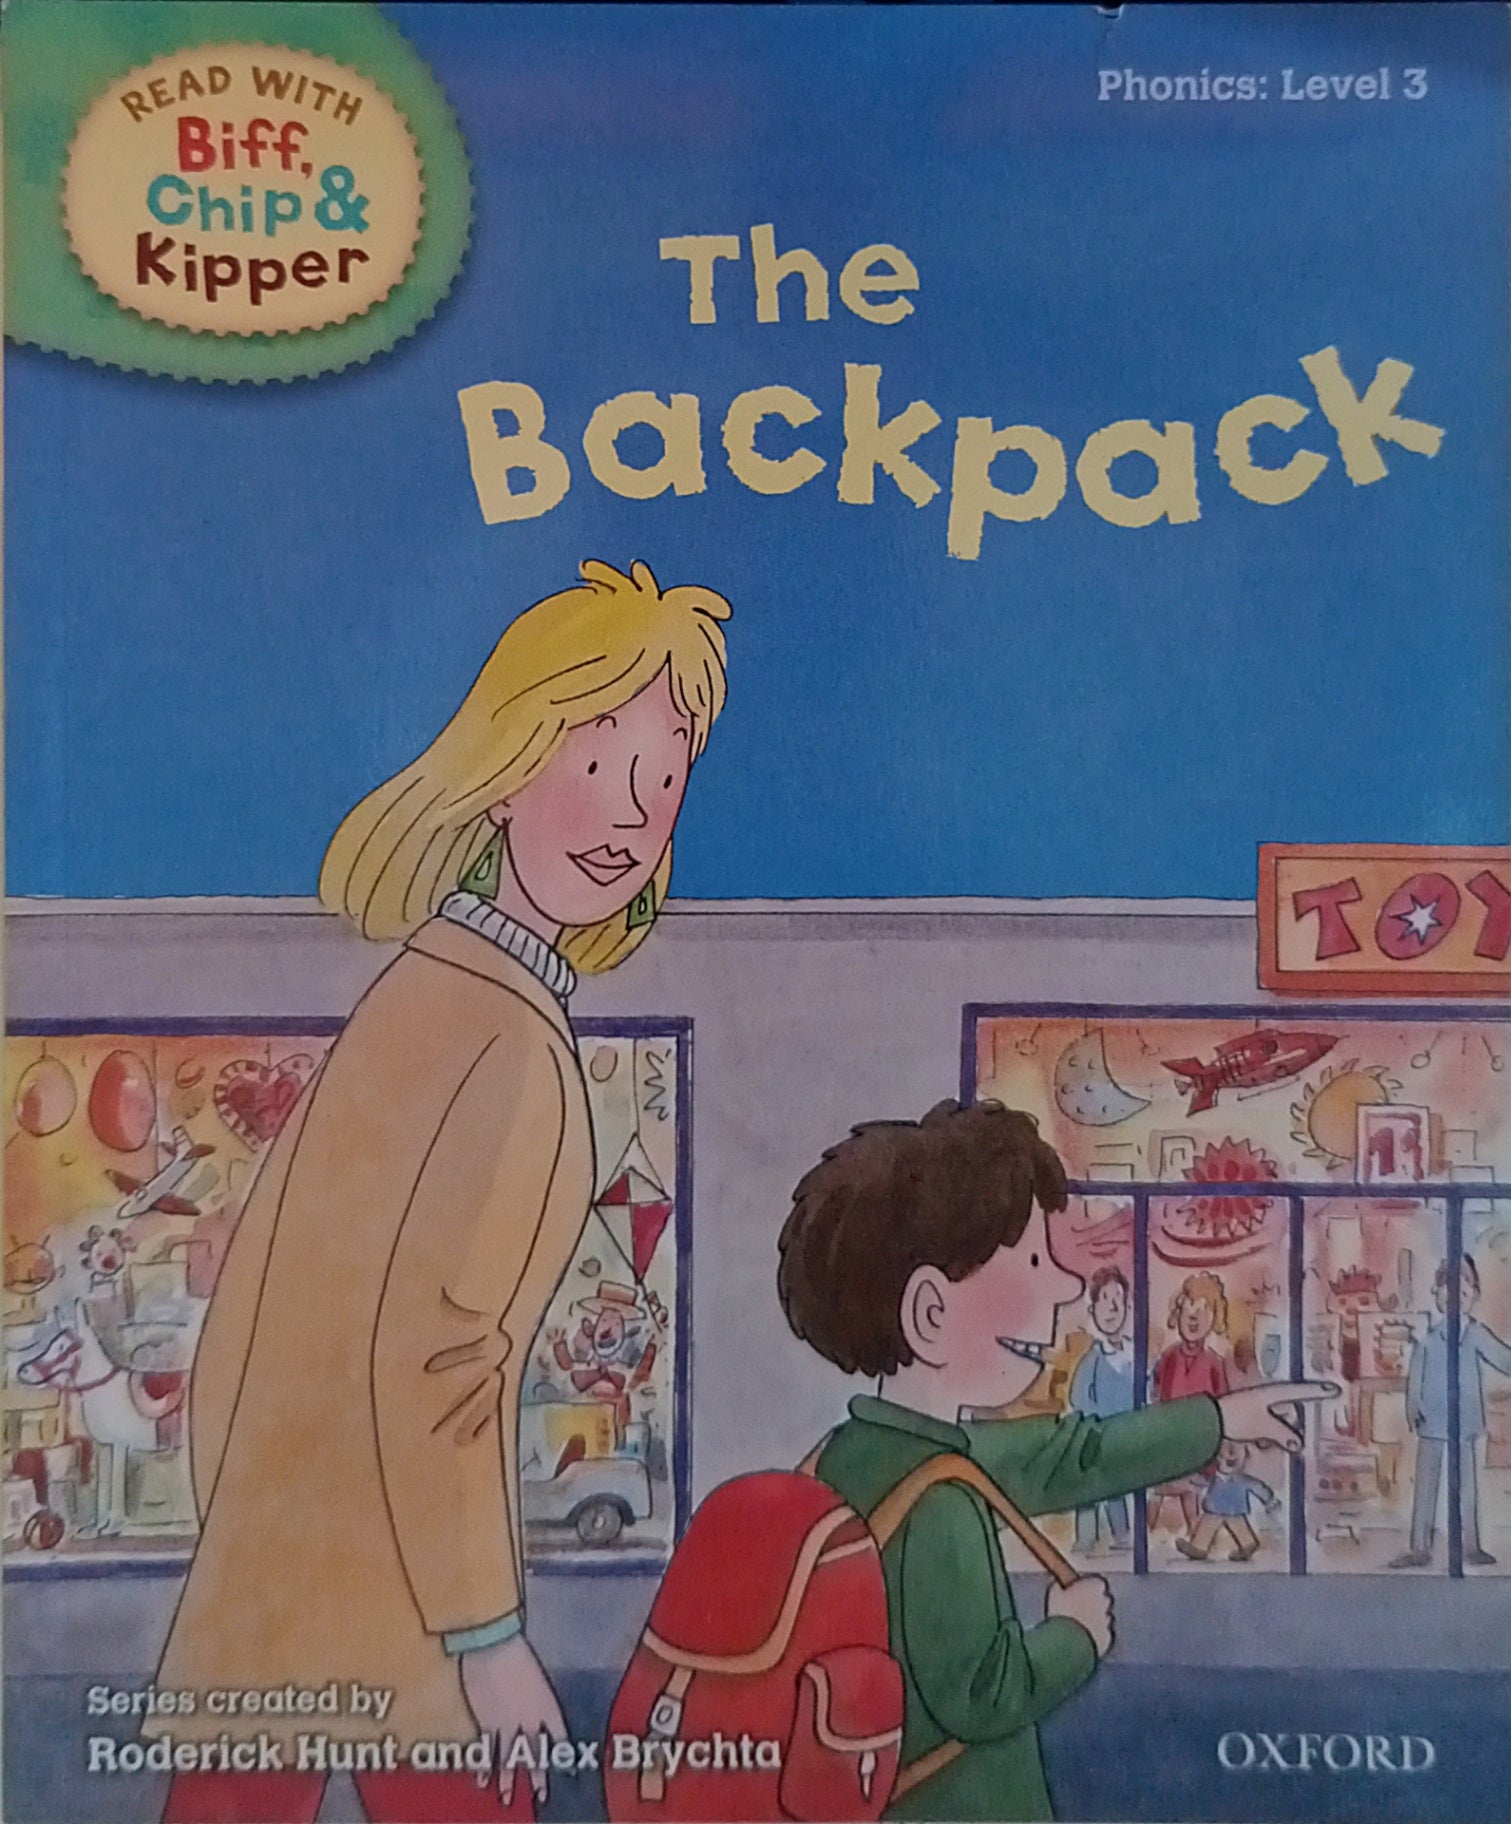 Read with Biff, Chip & Kipper - The Backpack (Phonics Level 3)